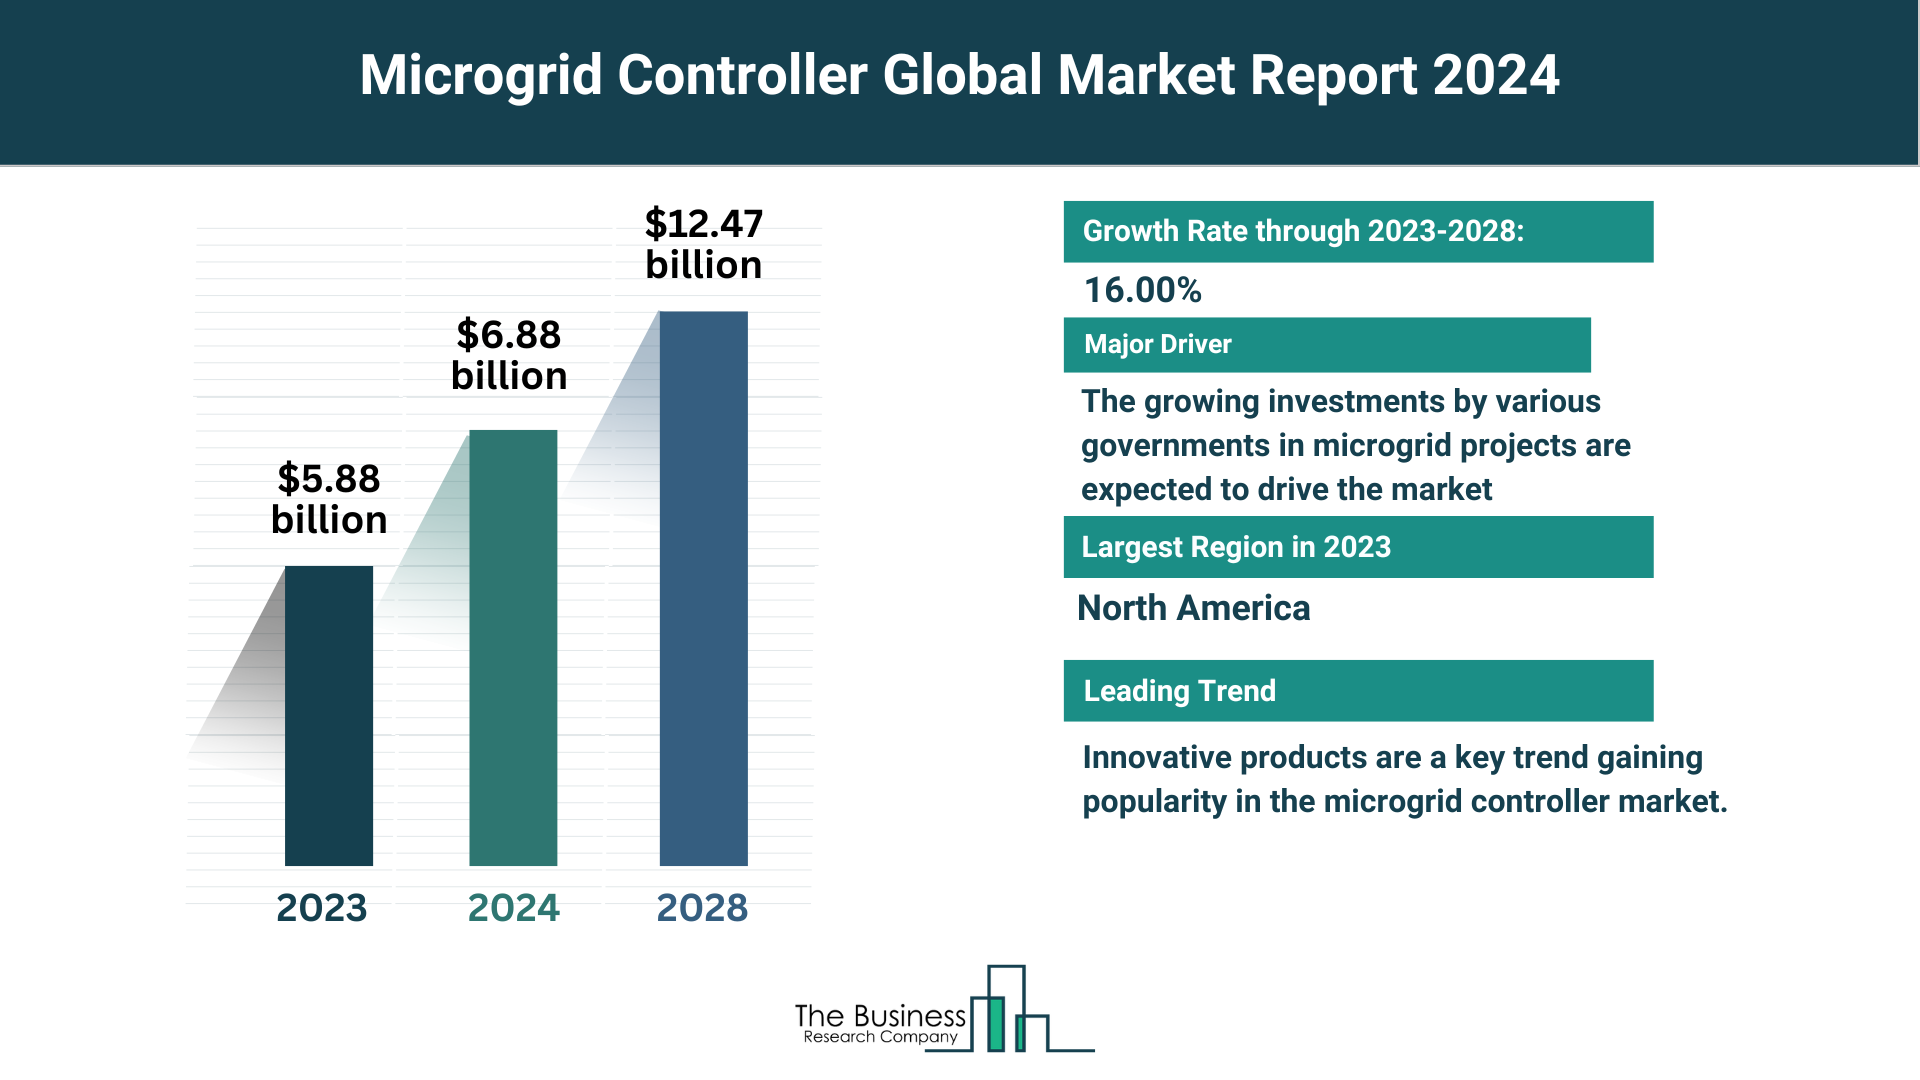 5 Key Takeaways From The Microgrid Controller Market Report 2024